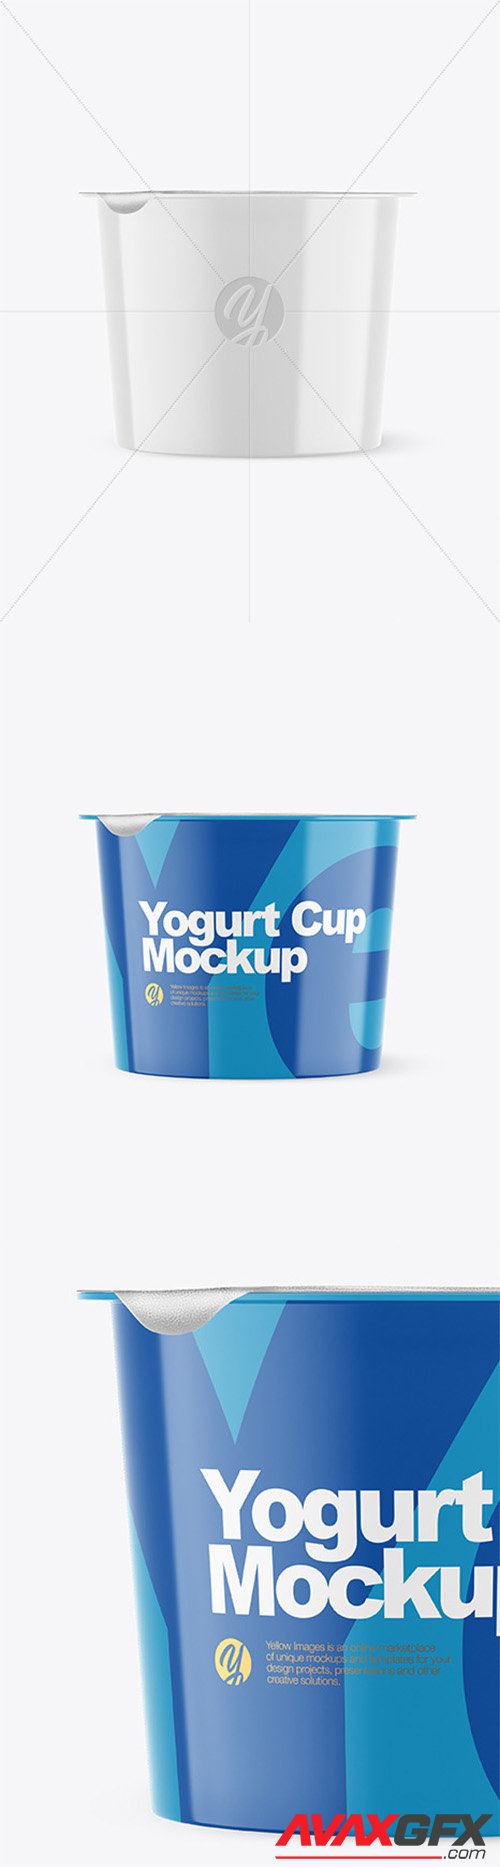 Download Download Glossy Yogurt Cup Front View Potoshop Yellowimages Mockups